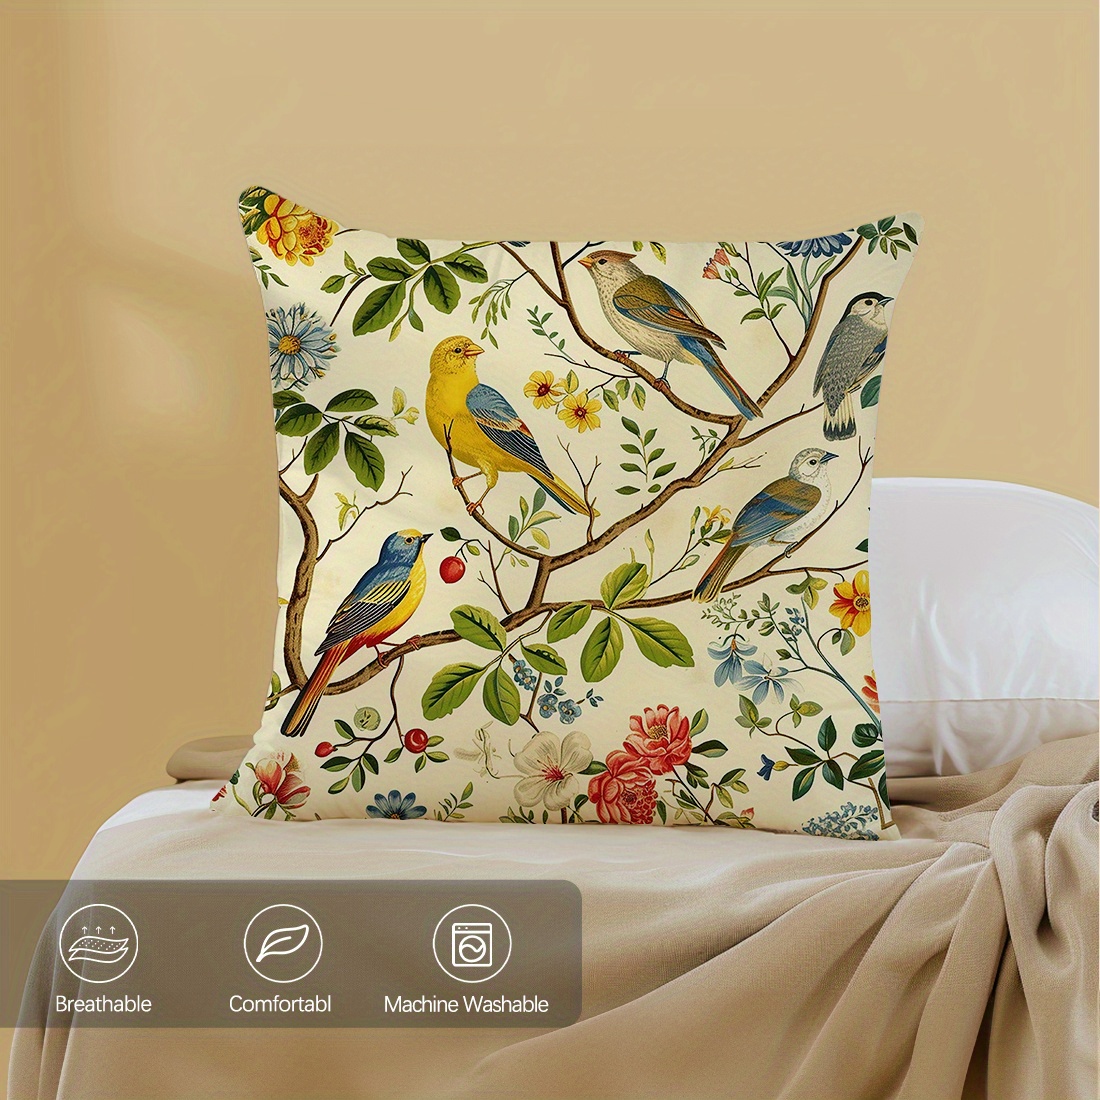 

1pc Bird-on-tree Illustration Single-sided Print Throw Pillow Cover, Contemporary Style, Peach Skin Velvet Sofa Cushion Case 45x45cm (17.7x17.7 Inches) - Cozy & Machine Washable Home Decor